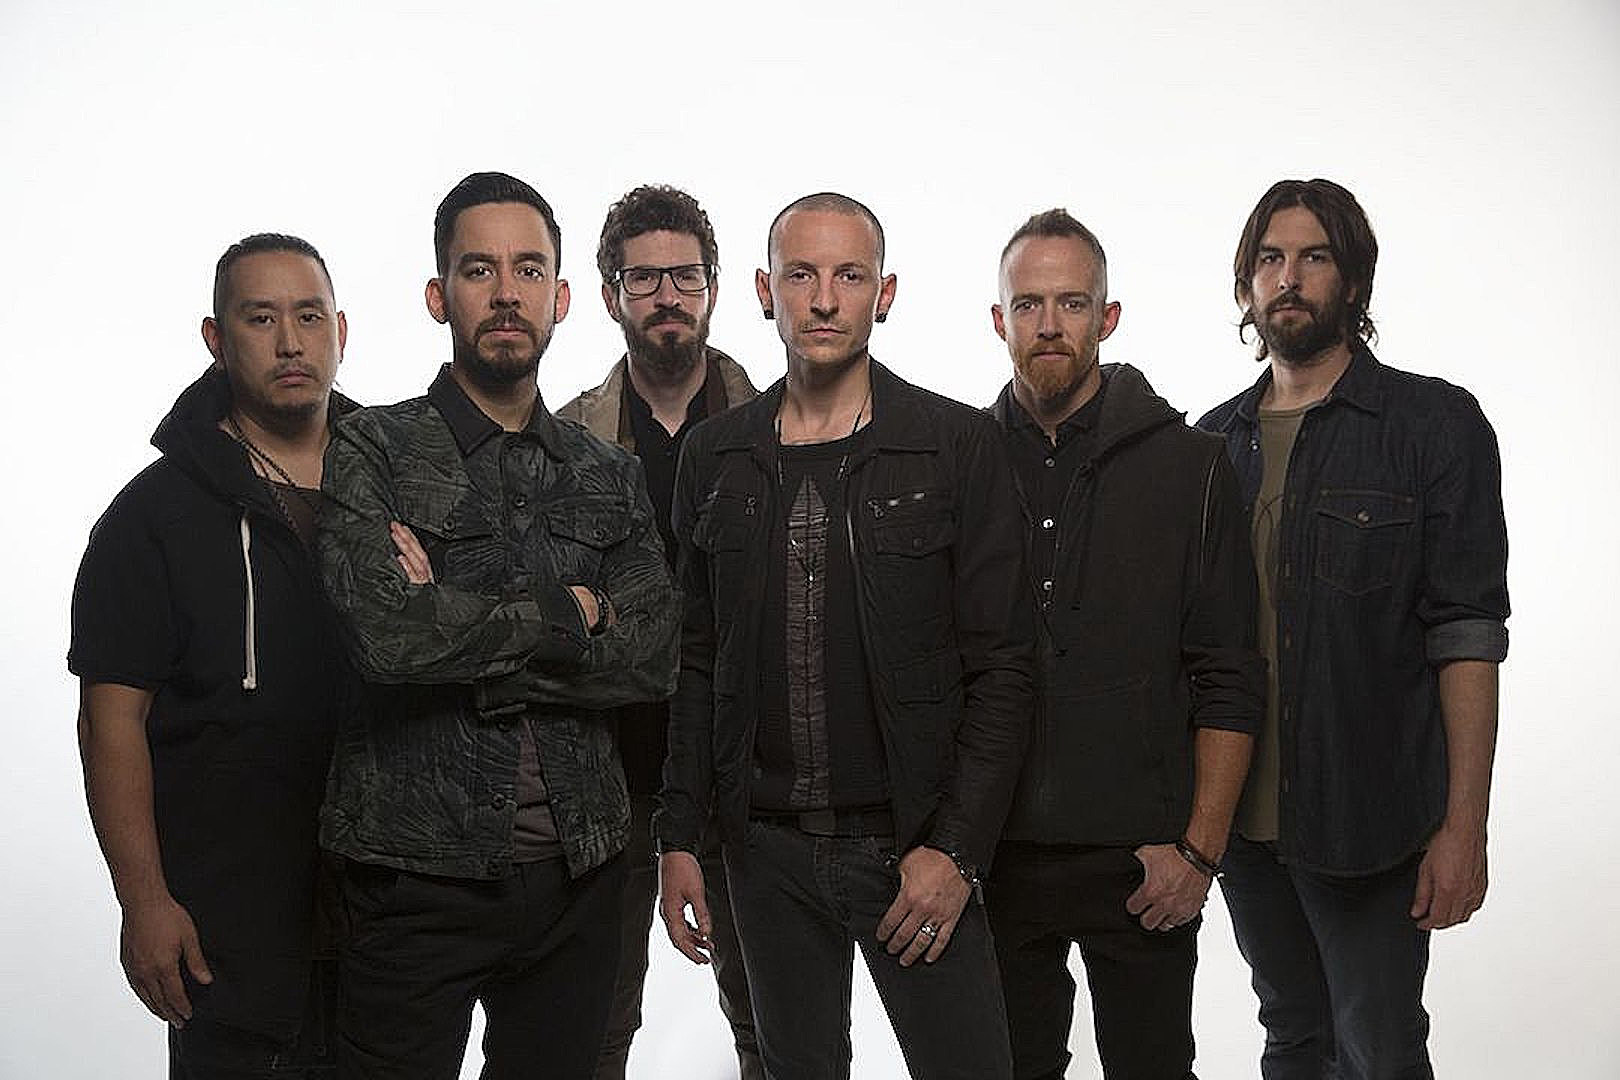 Linkin Park Live on X: Fighting Myself to be the next pre-release song  from Linkin Park's #Meteora20? Apple Music has updated to show the track  length (3:21) of Fighting Myself, usually a